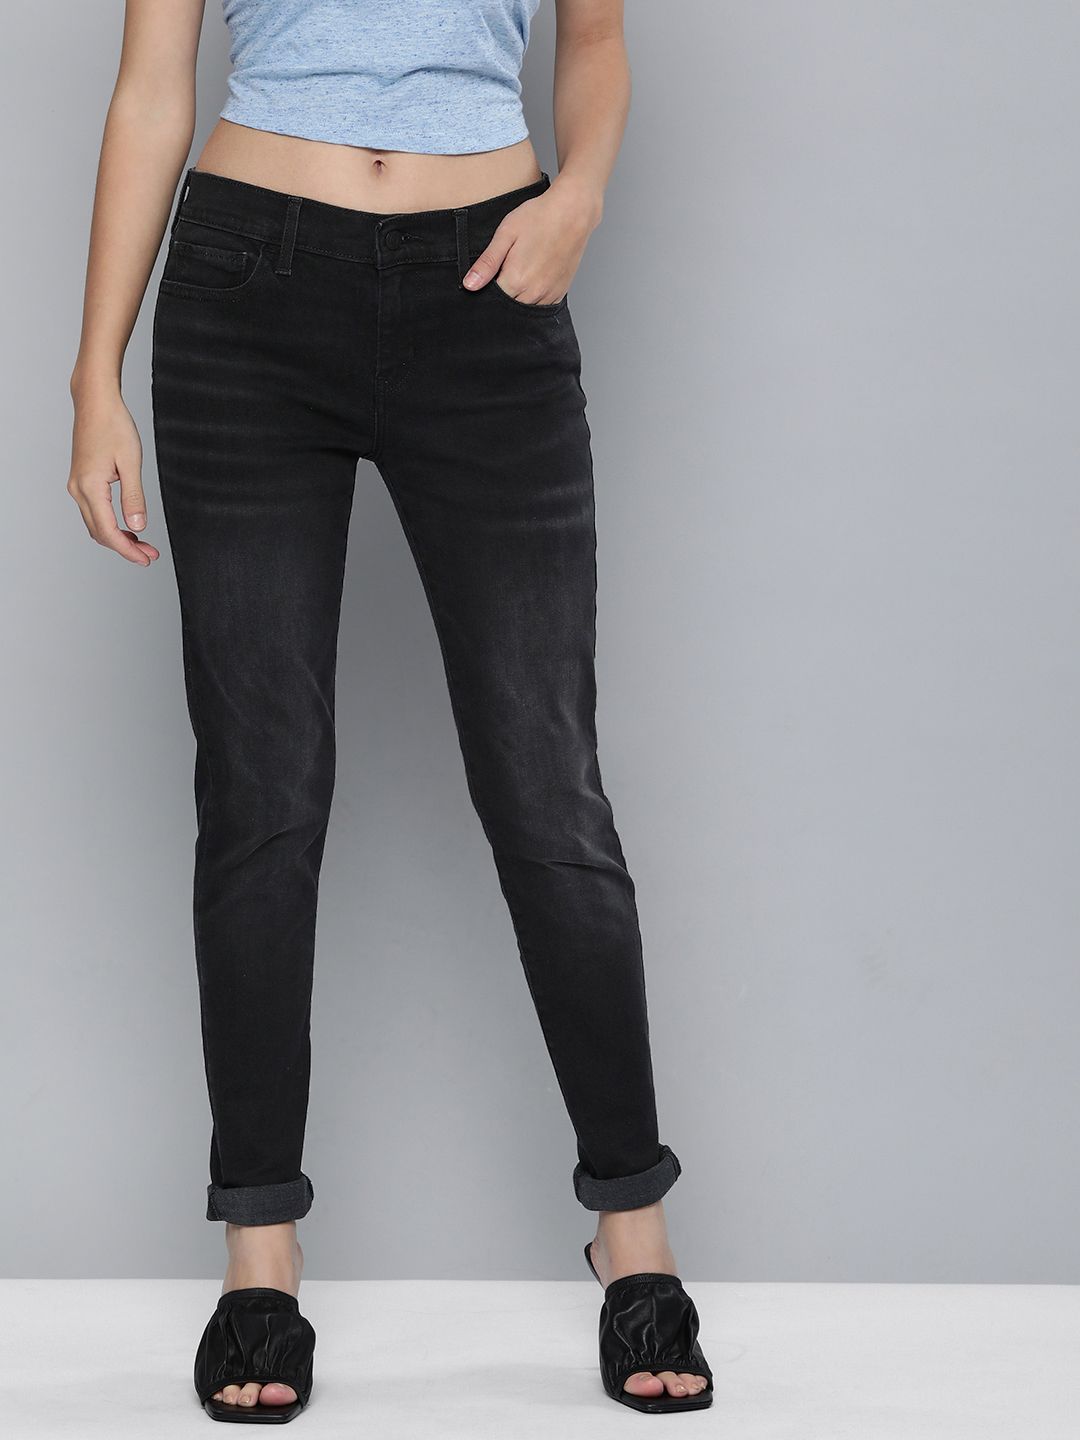 Levis Women Black 710 Super Skinny Fit Mid Rise Light Fade Stretchable Jeans Price in India